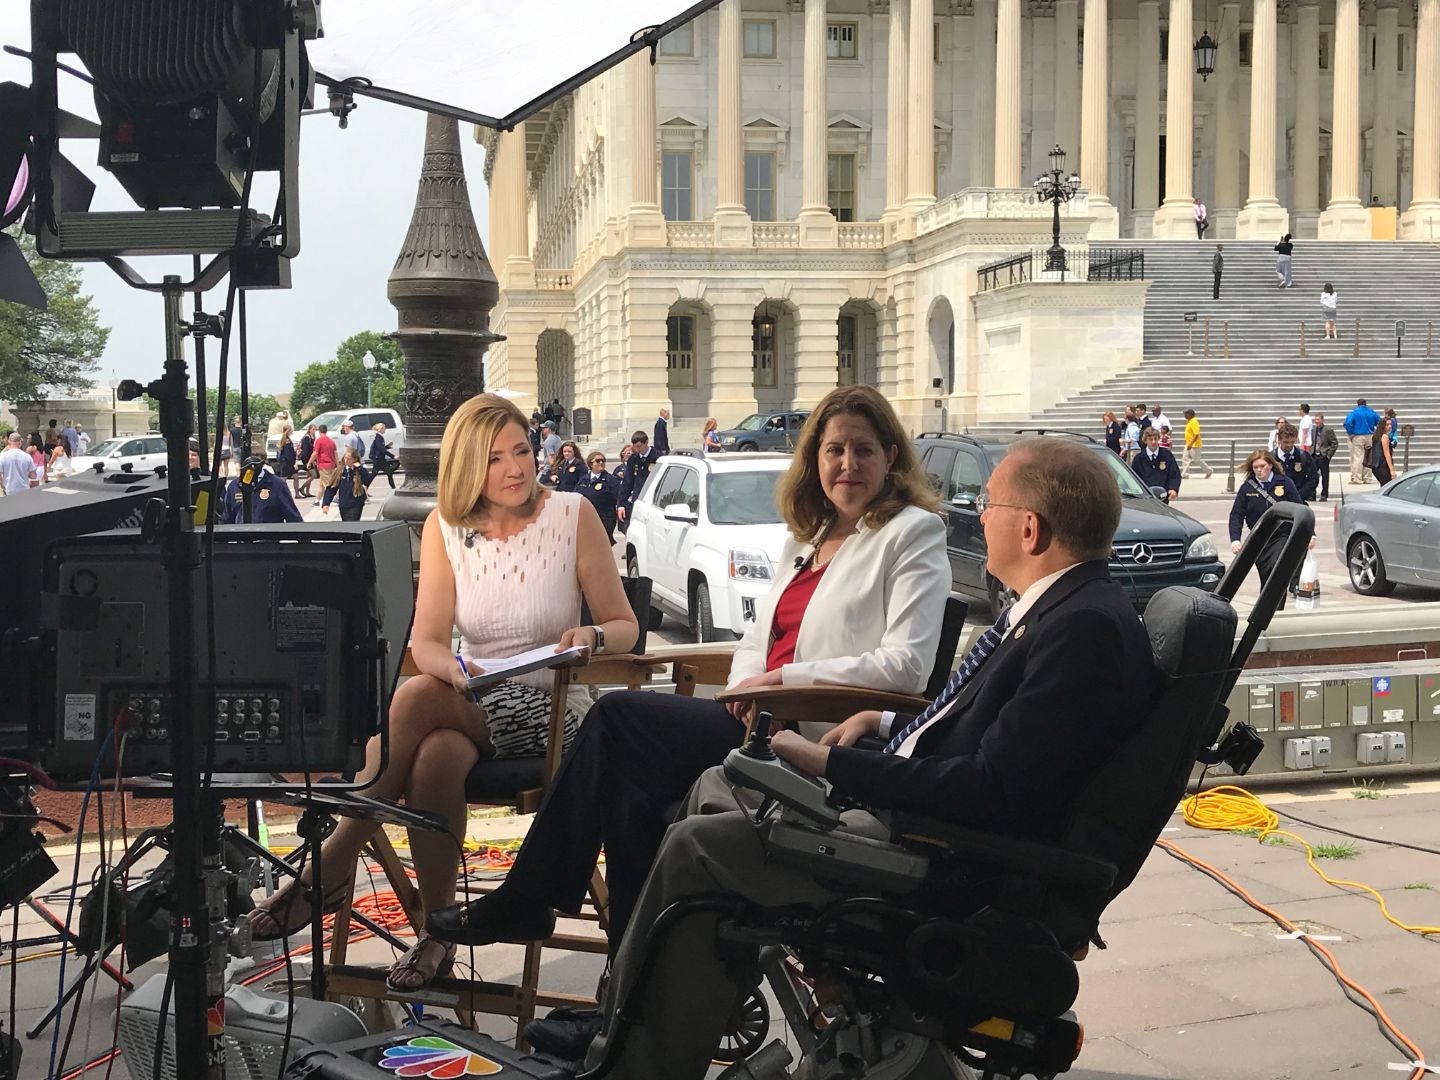 After the shooting in Del Ray in 2017, MSNBC invited Mayor Silberberg to Capitol Hill to speak about the need for common sense gun reform laws.